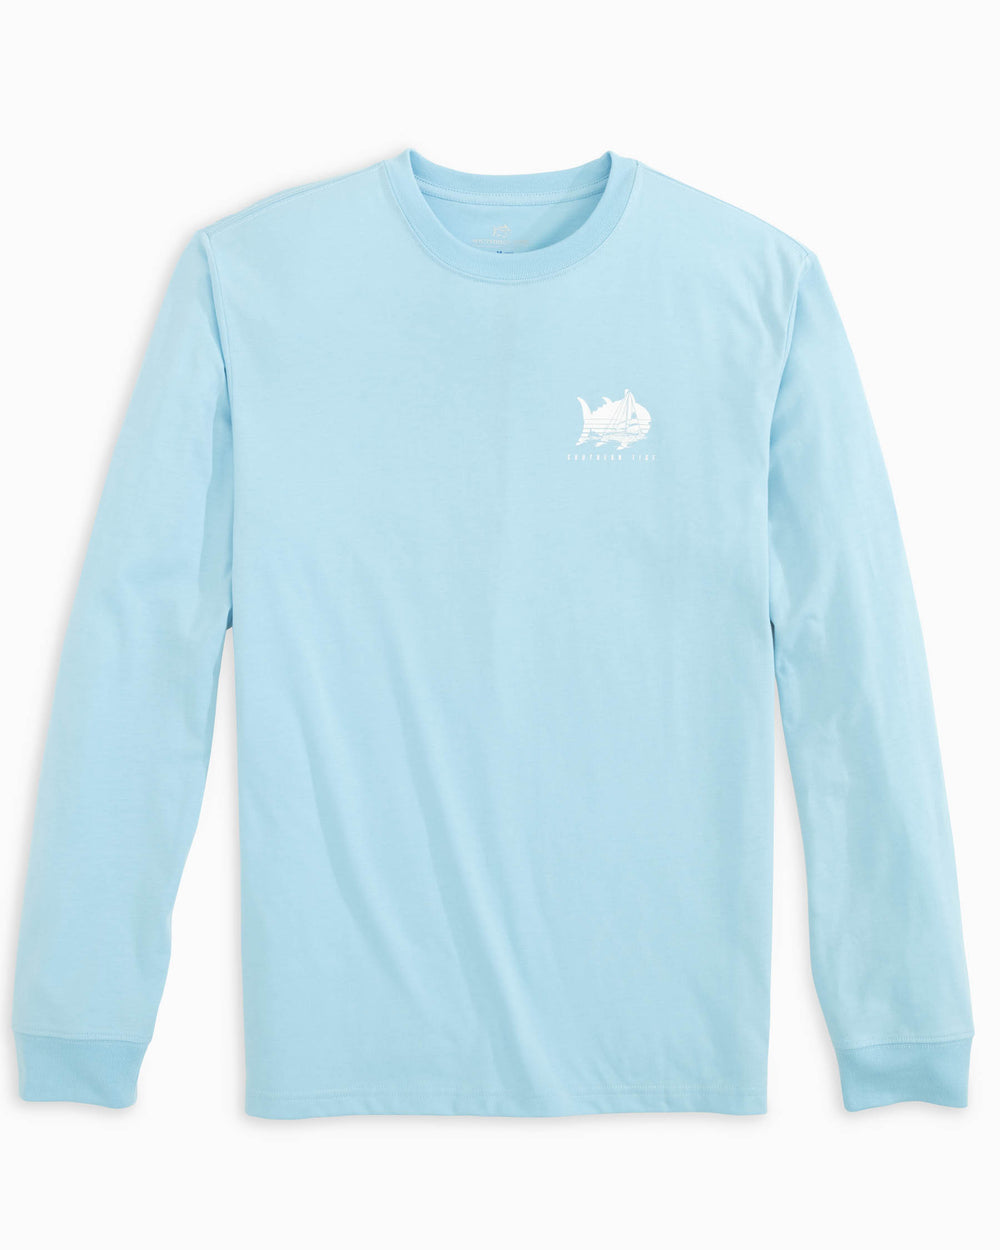 The front view of the Southern Tide Southern Sailing Long Sleeve T-Shirt by Southern Tide - Rain Water